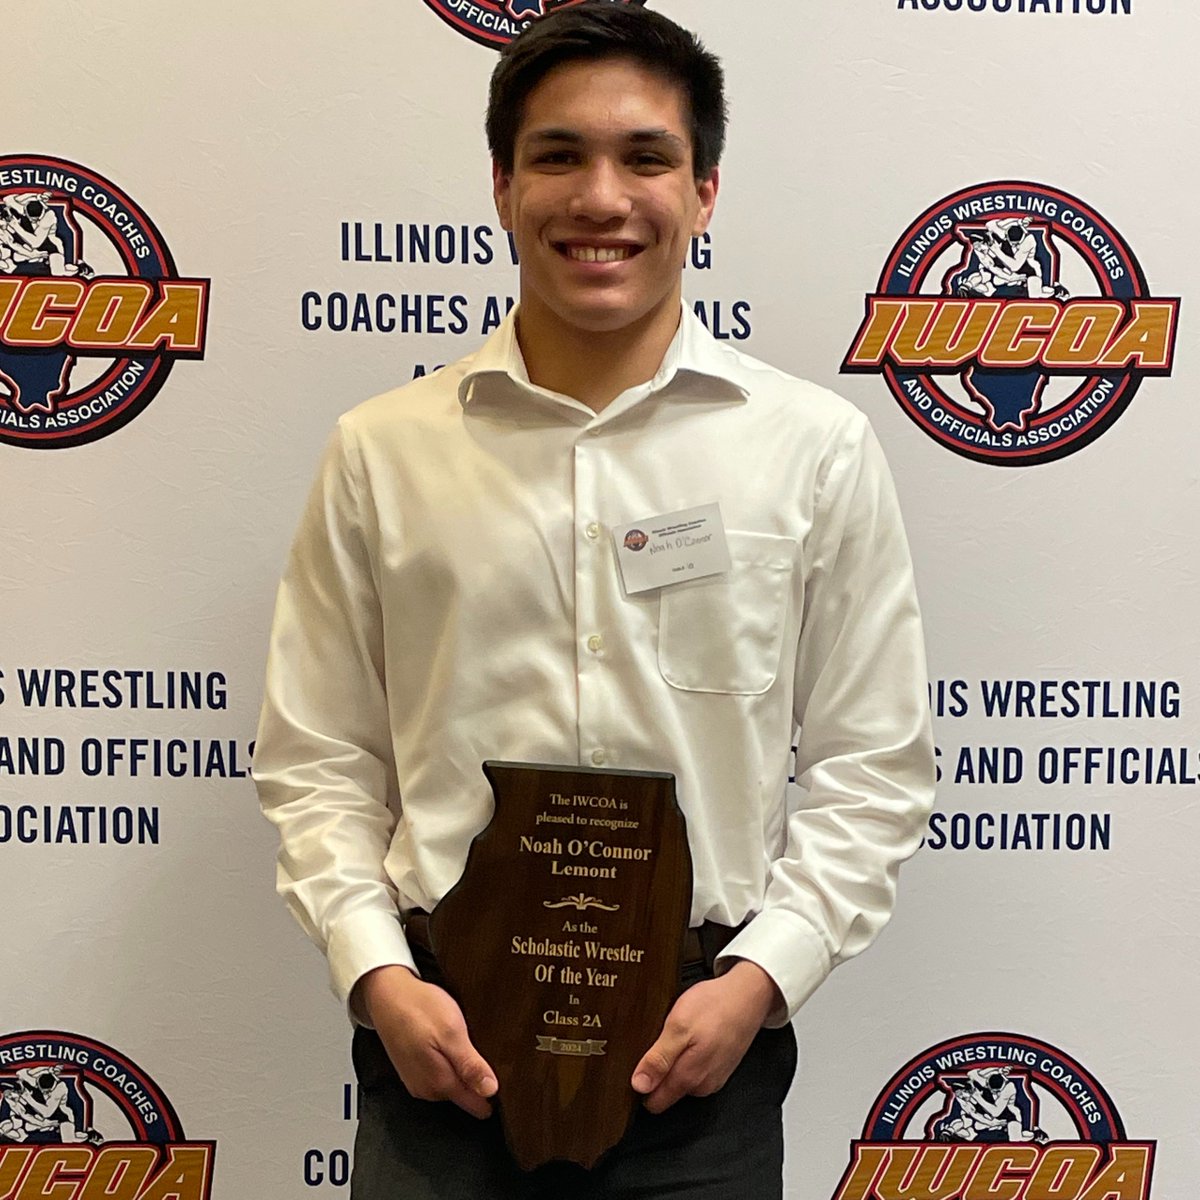 Congrats to @LemontWrestling senior Noah O'Connor, who is one of two recipients of the 2024 Class 2A Scholar Wrestler of the Year Award by the Illinois Wrestling Coaches & Officials Association! He is the first in program history to earn this honor from the @IWCOA! #WeAreLemont